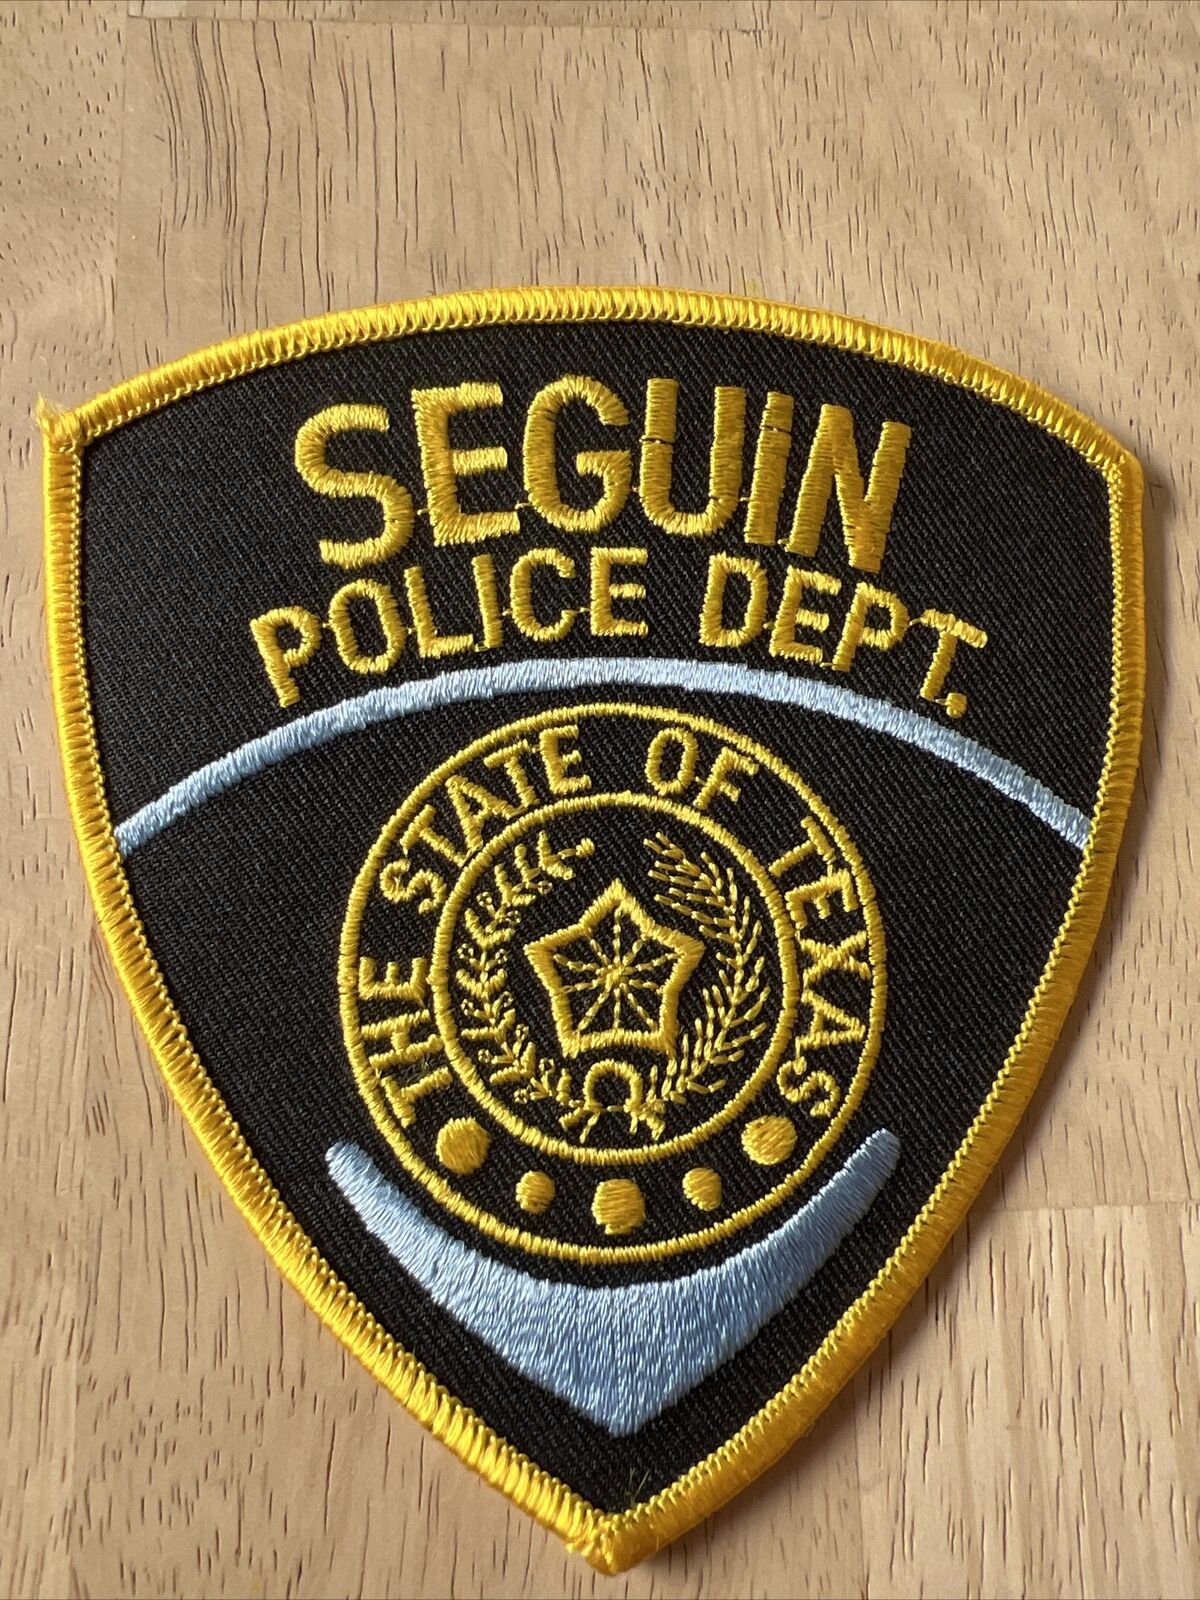 The State Of Texas Seguin Police Dept. Patch